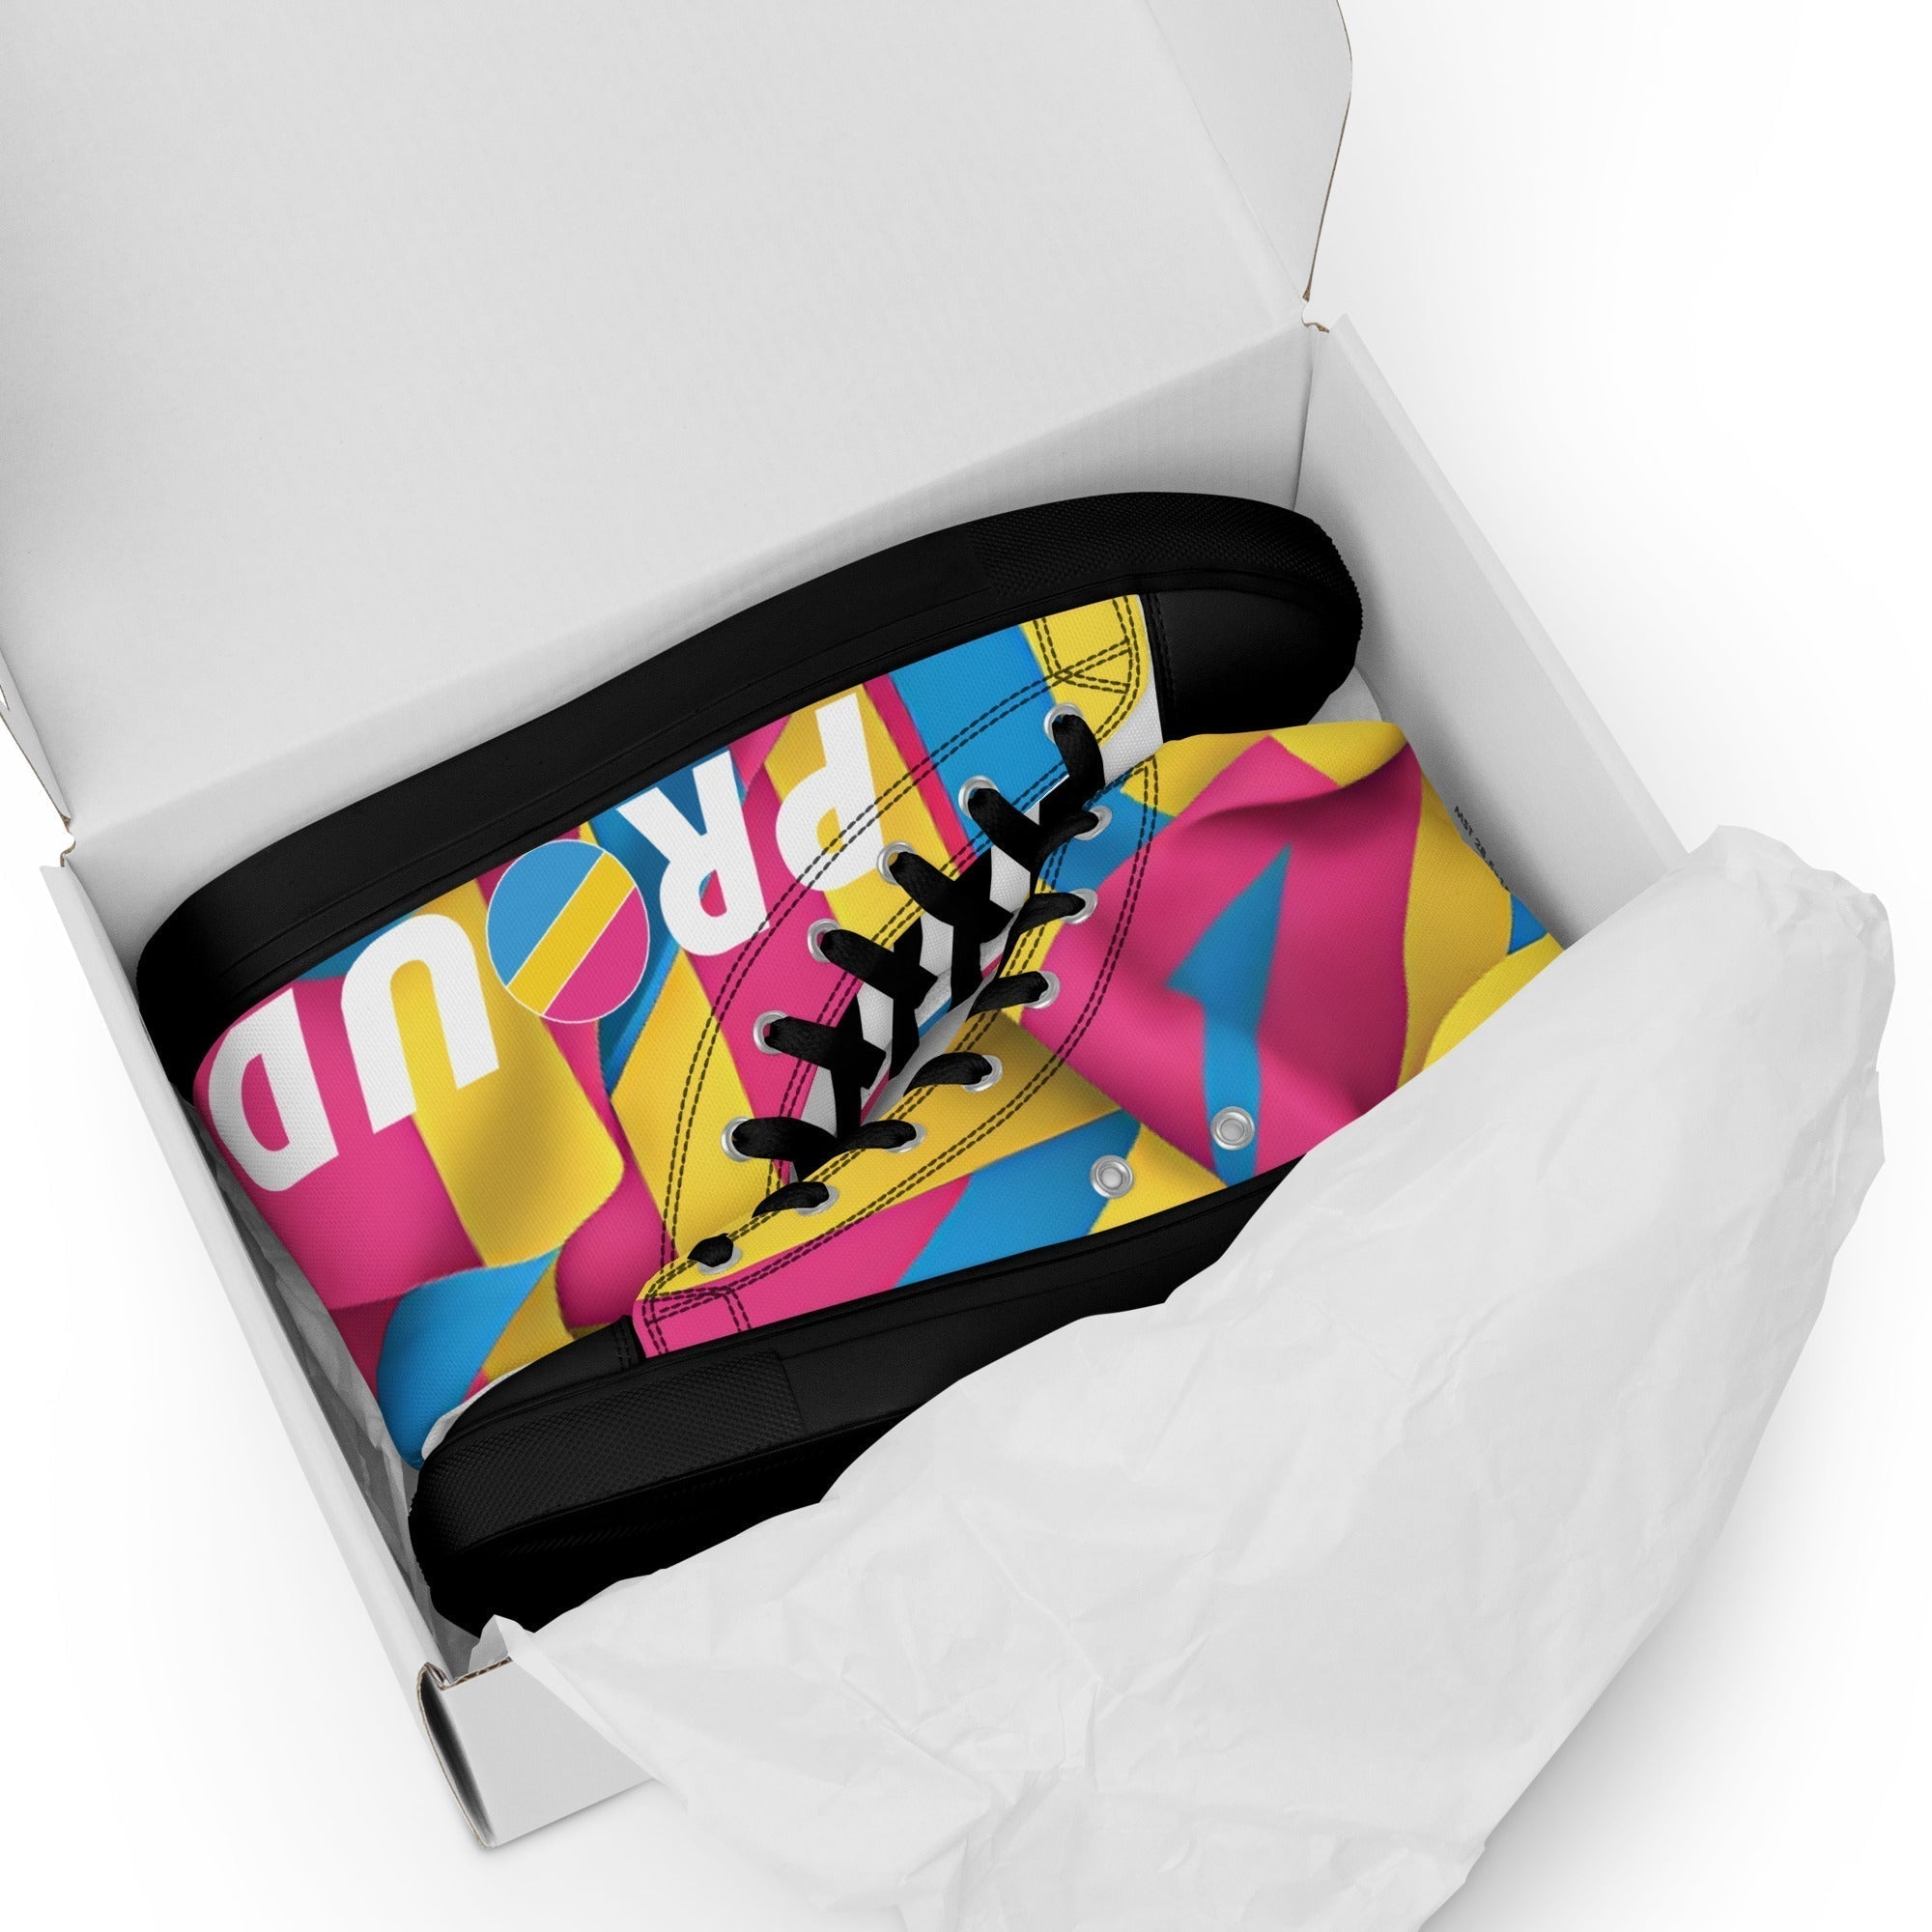 PROUD Pansexual Shoes